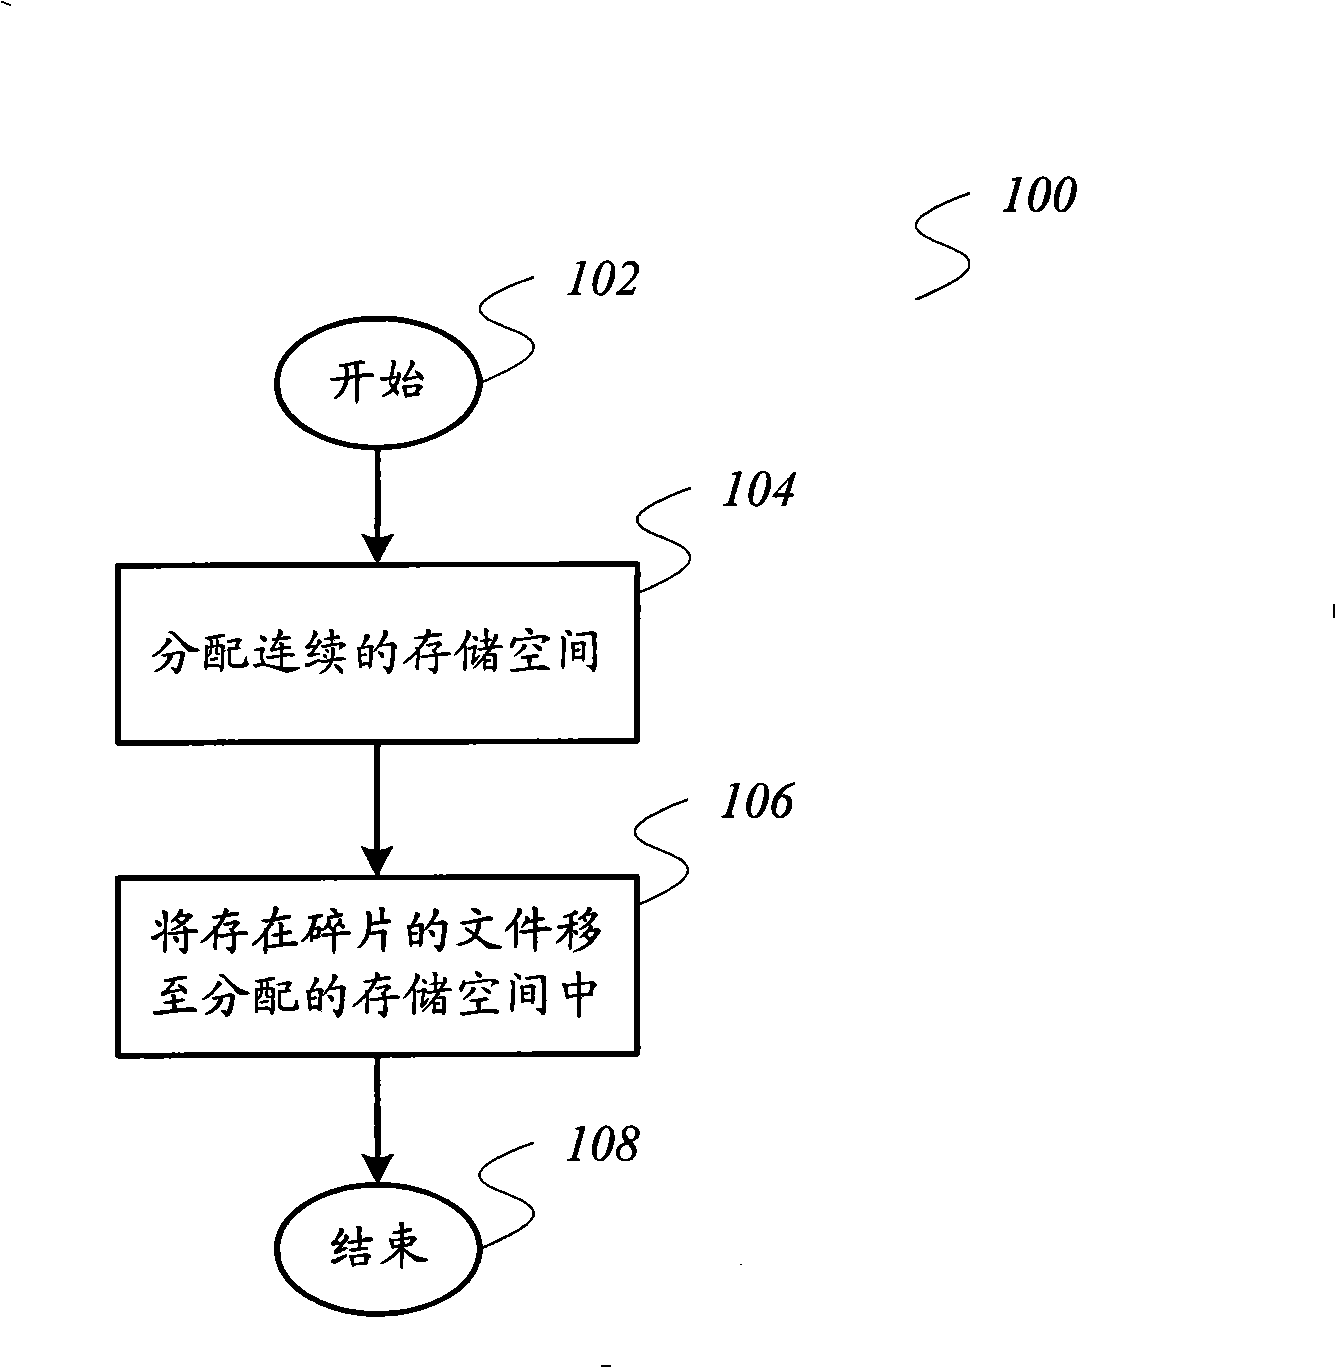 Method and system for arranging file chips